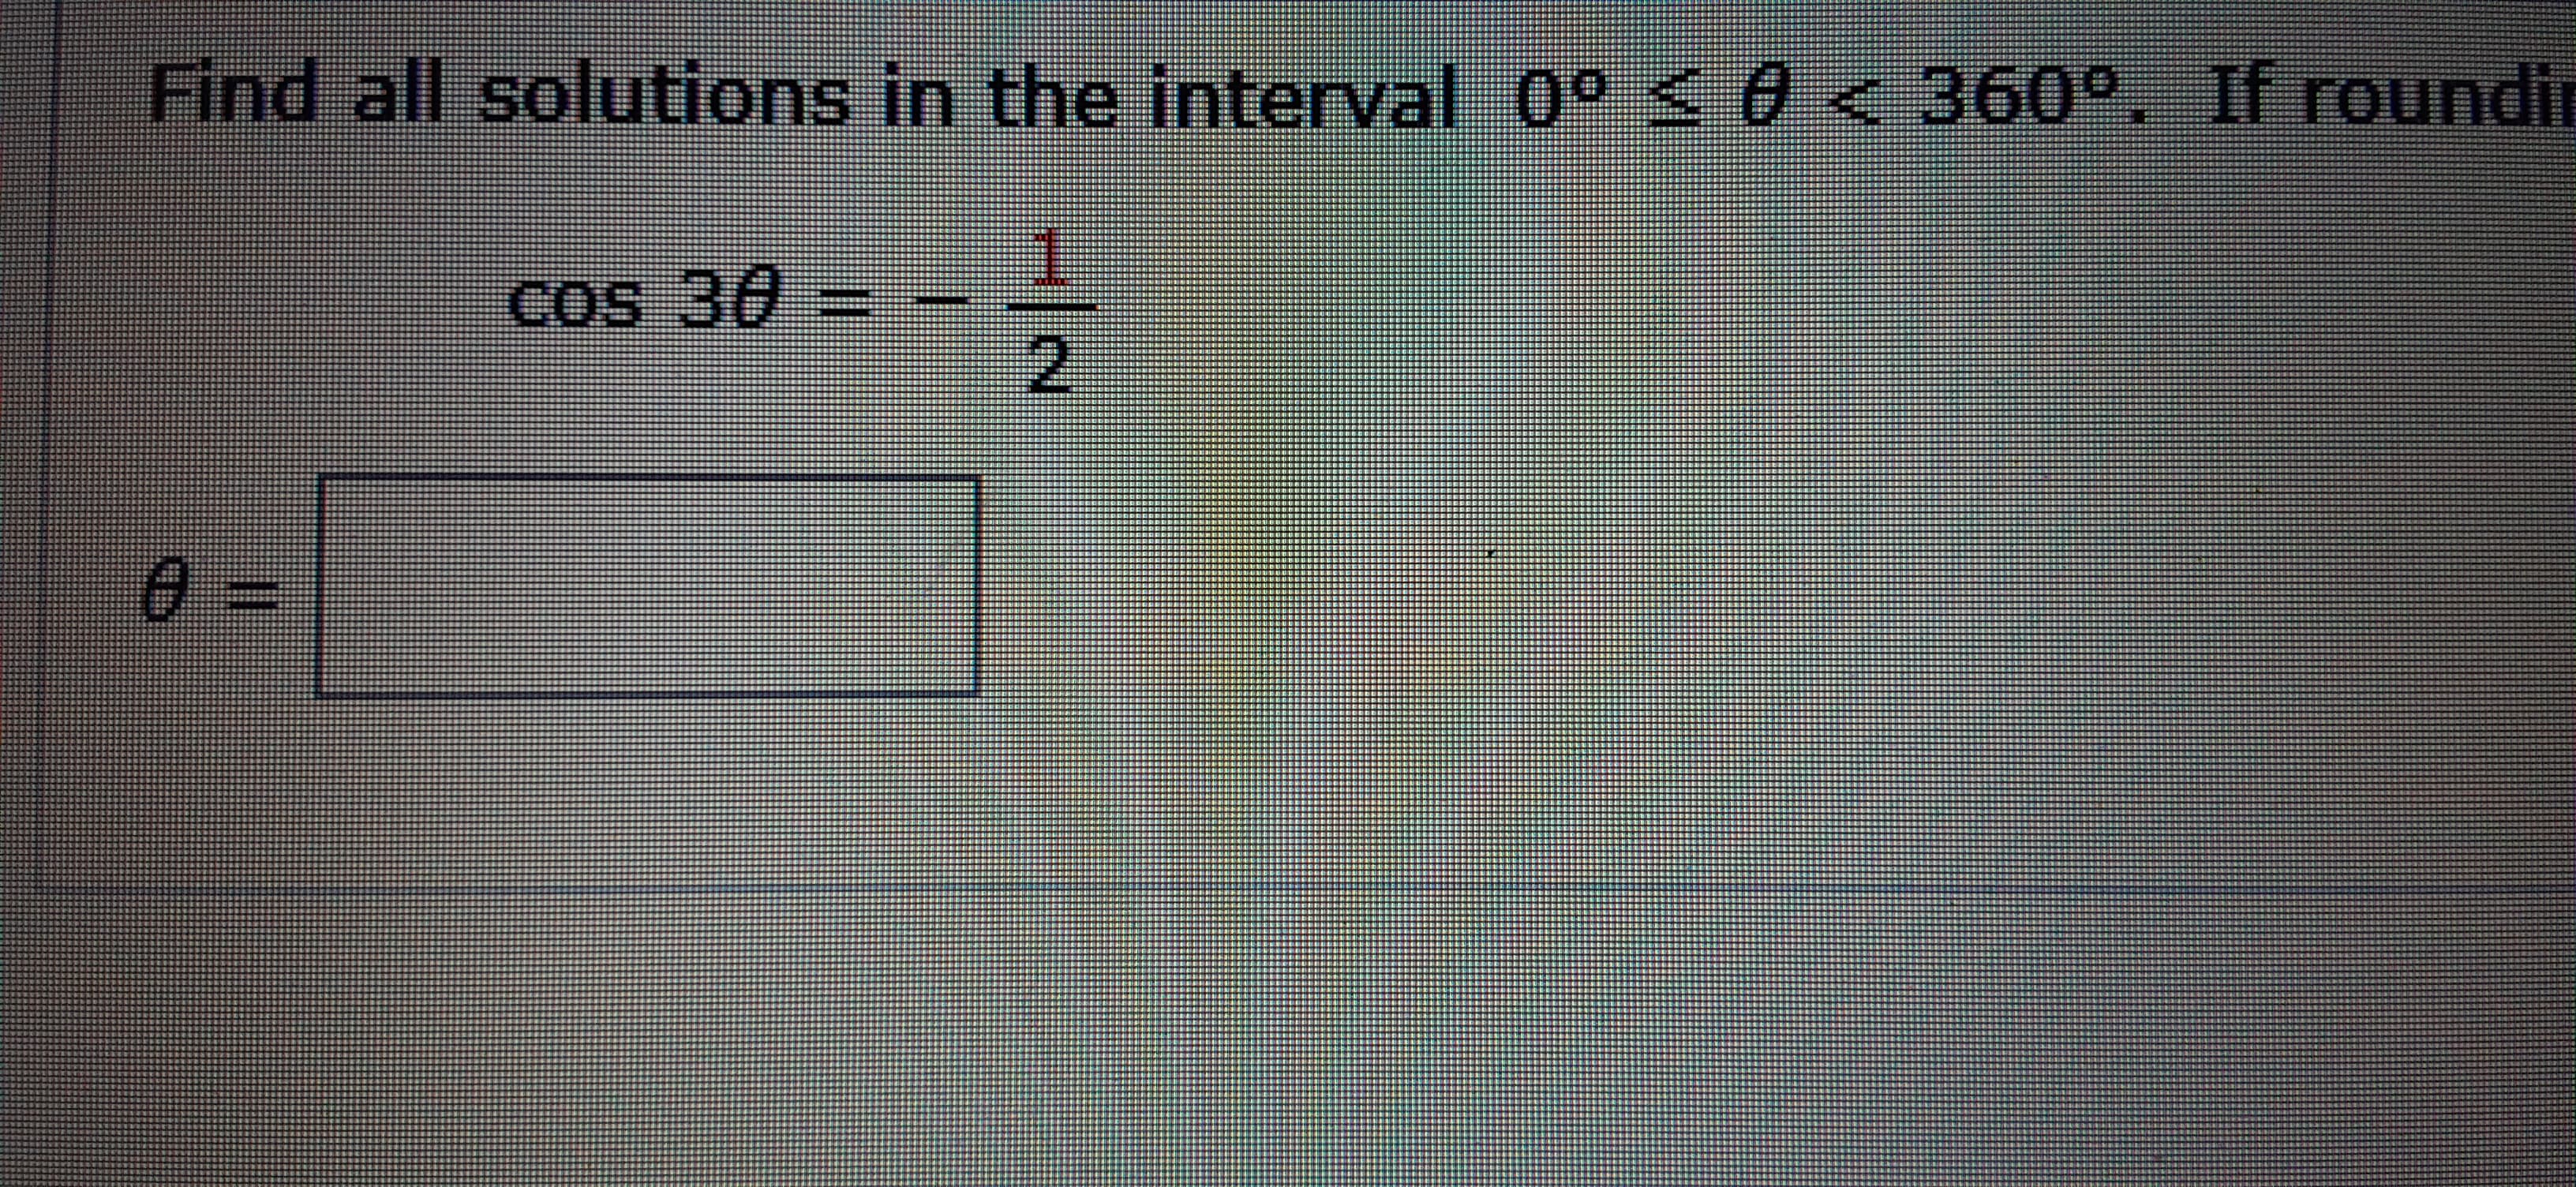 Find all solutions in the interval 0° 0<360°
cos 30
2.
